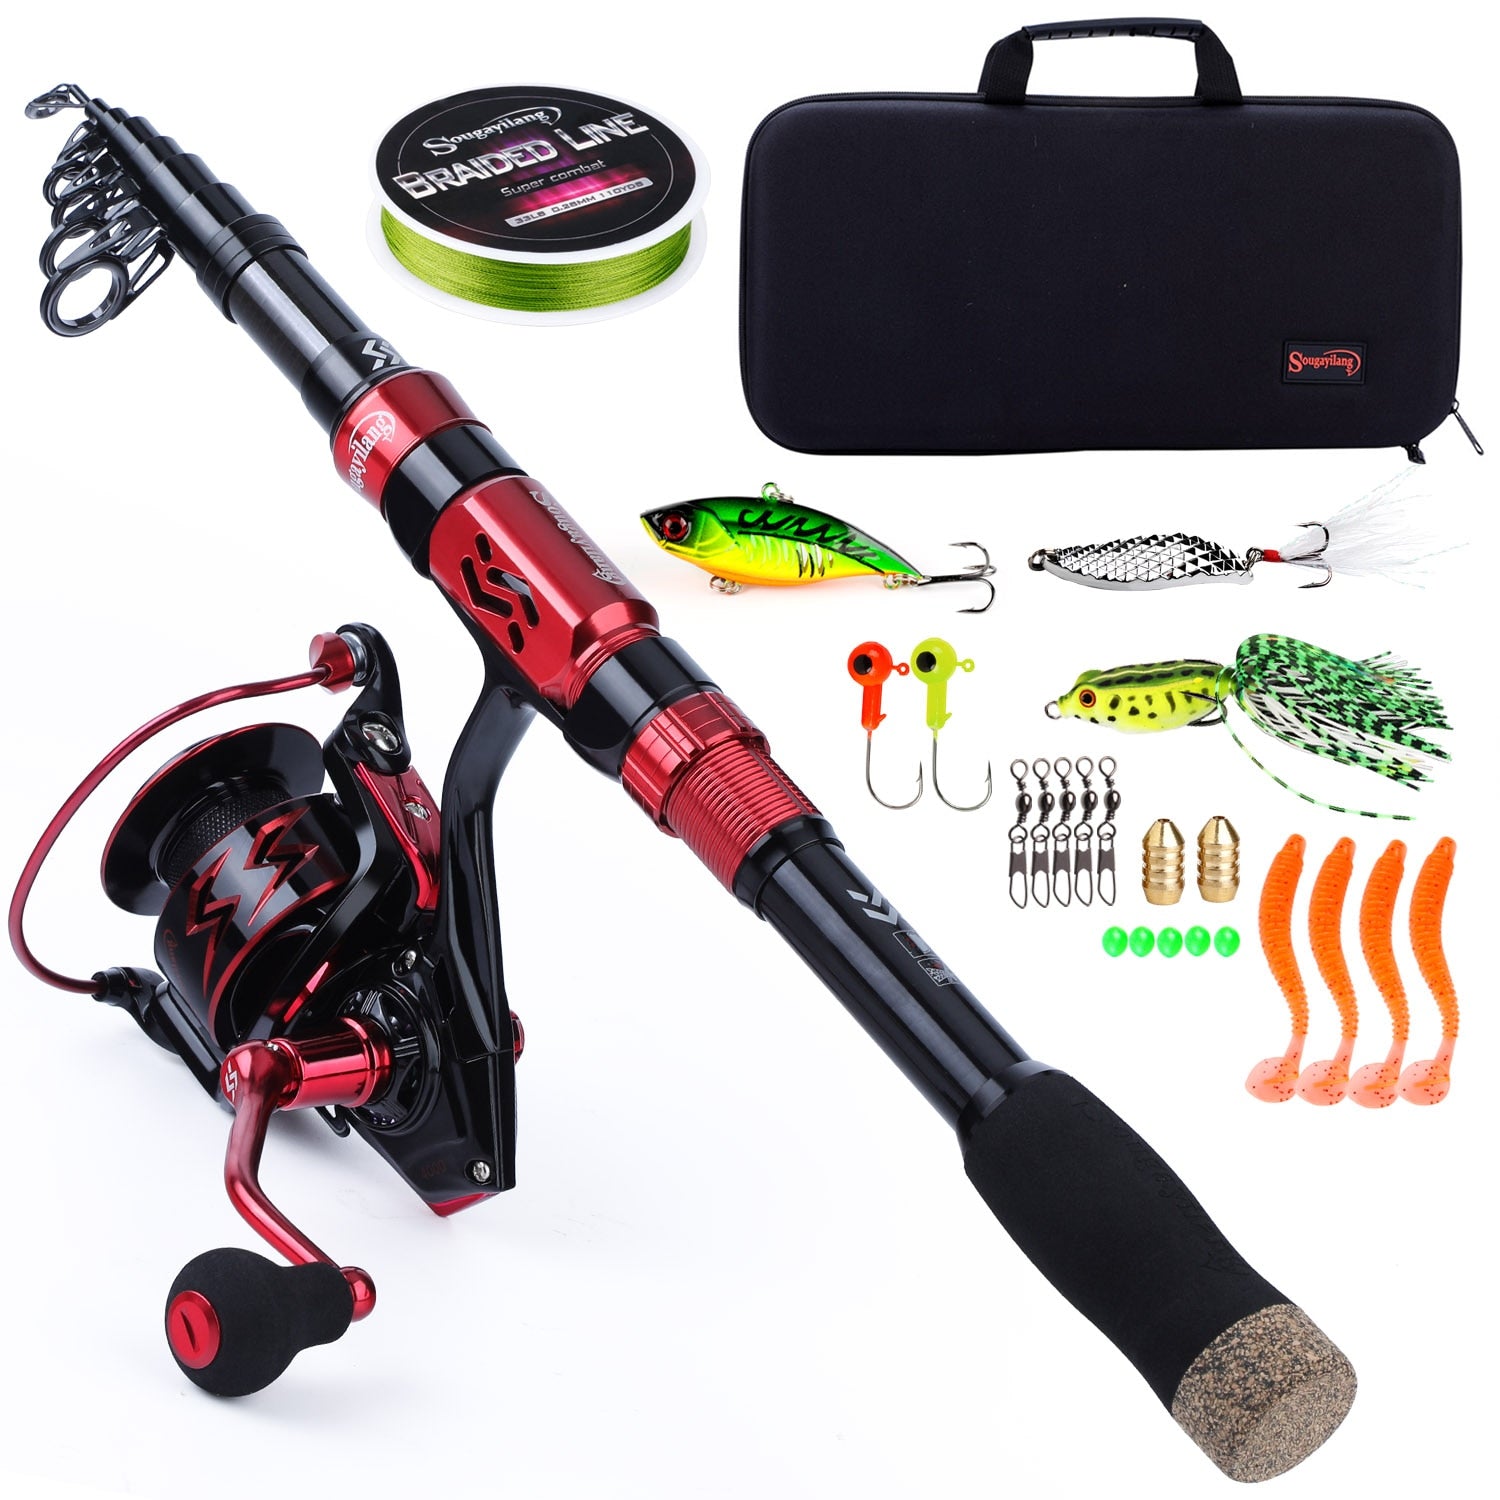 Exquisite Fishing Rod Telescopic Fishing Rod and Reel Combo